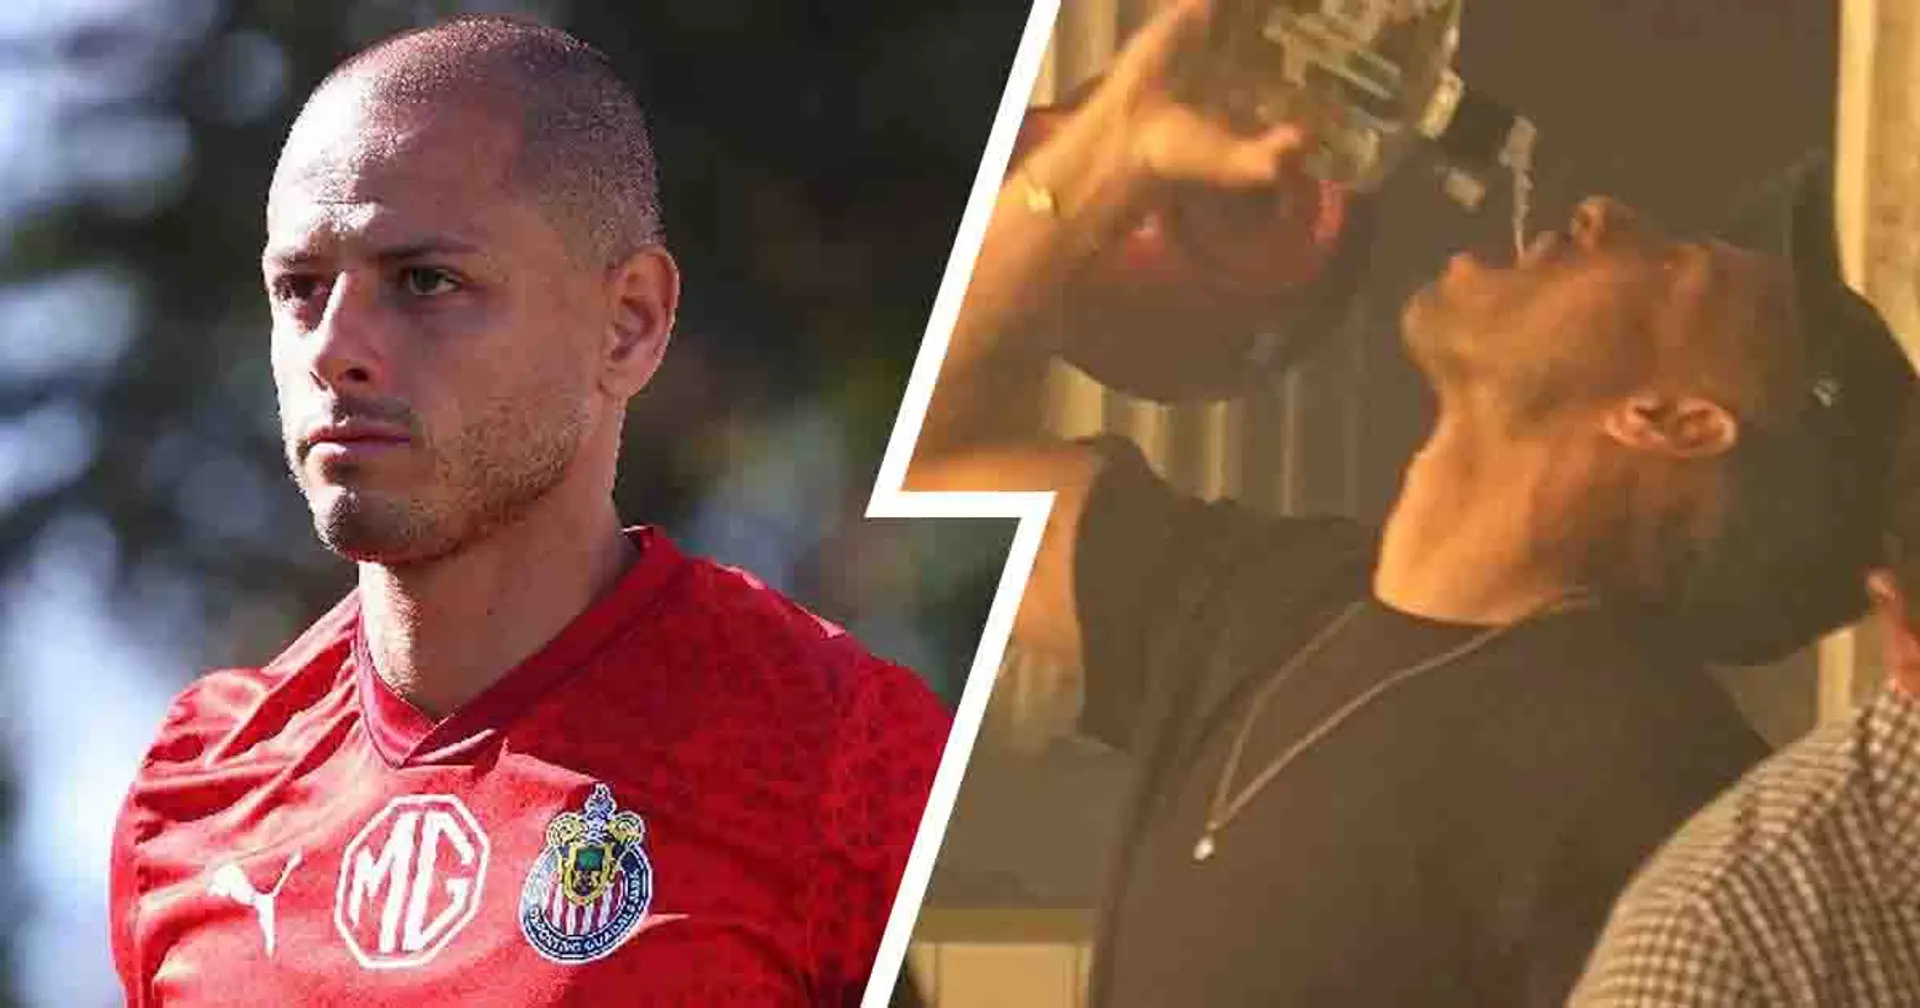 Spotted: Chicharito celebrates first Chivas goal in 14 years by drinking tequila right off the bottle